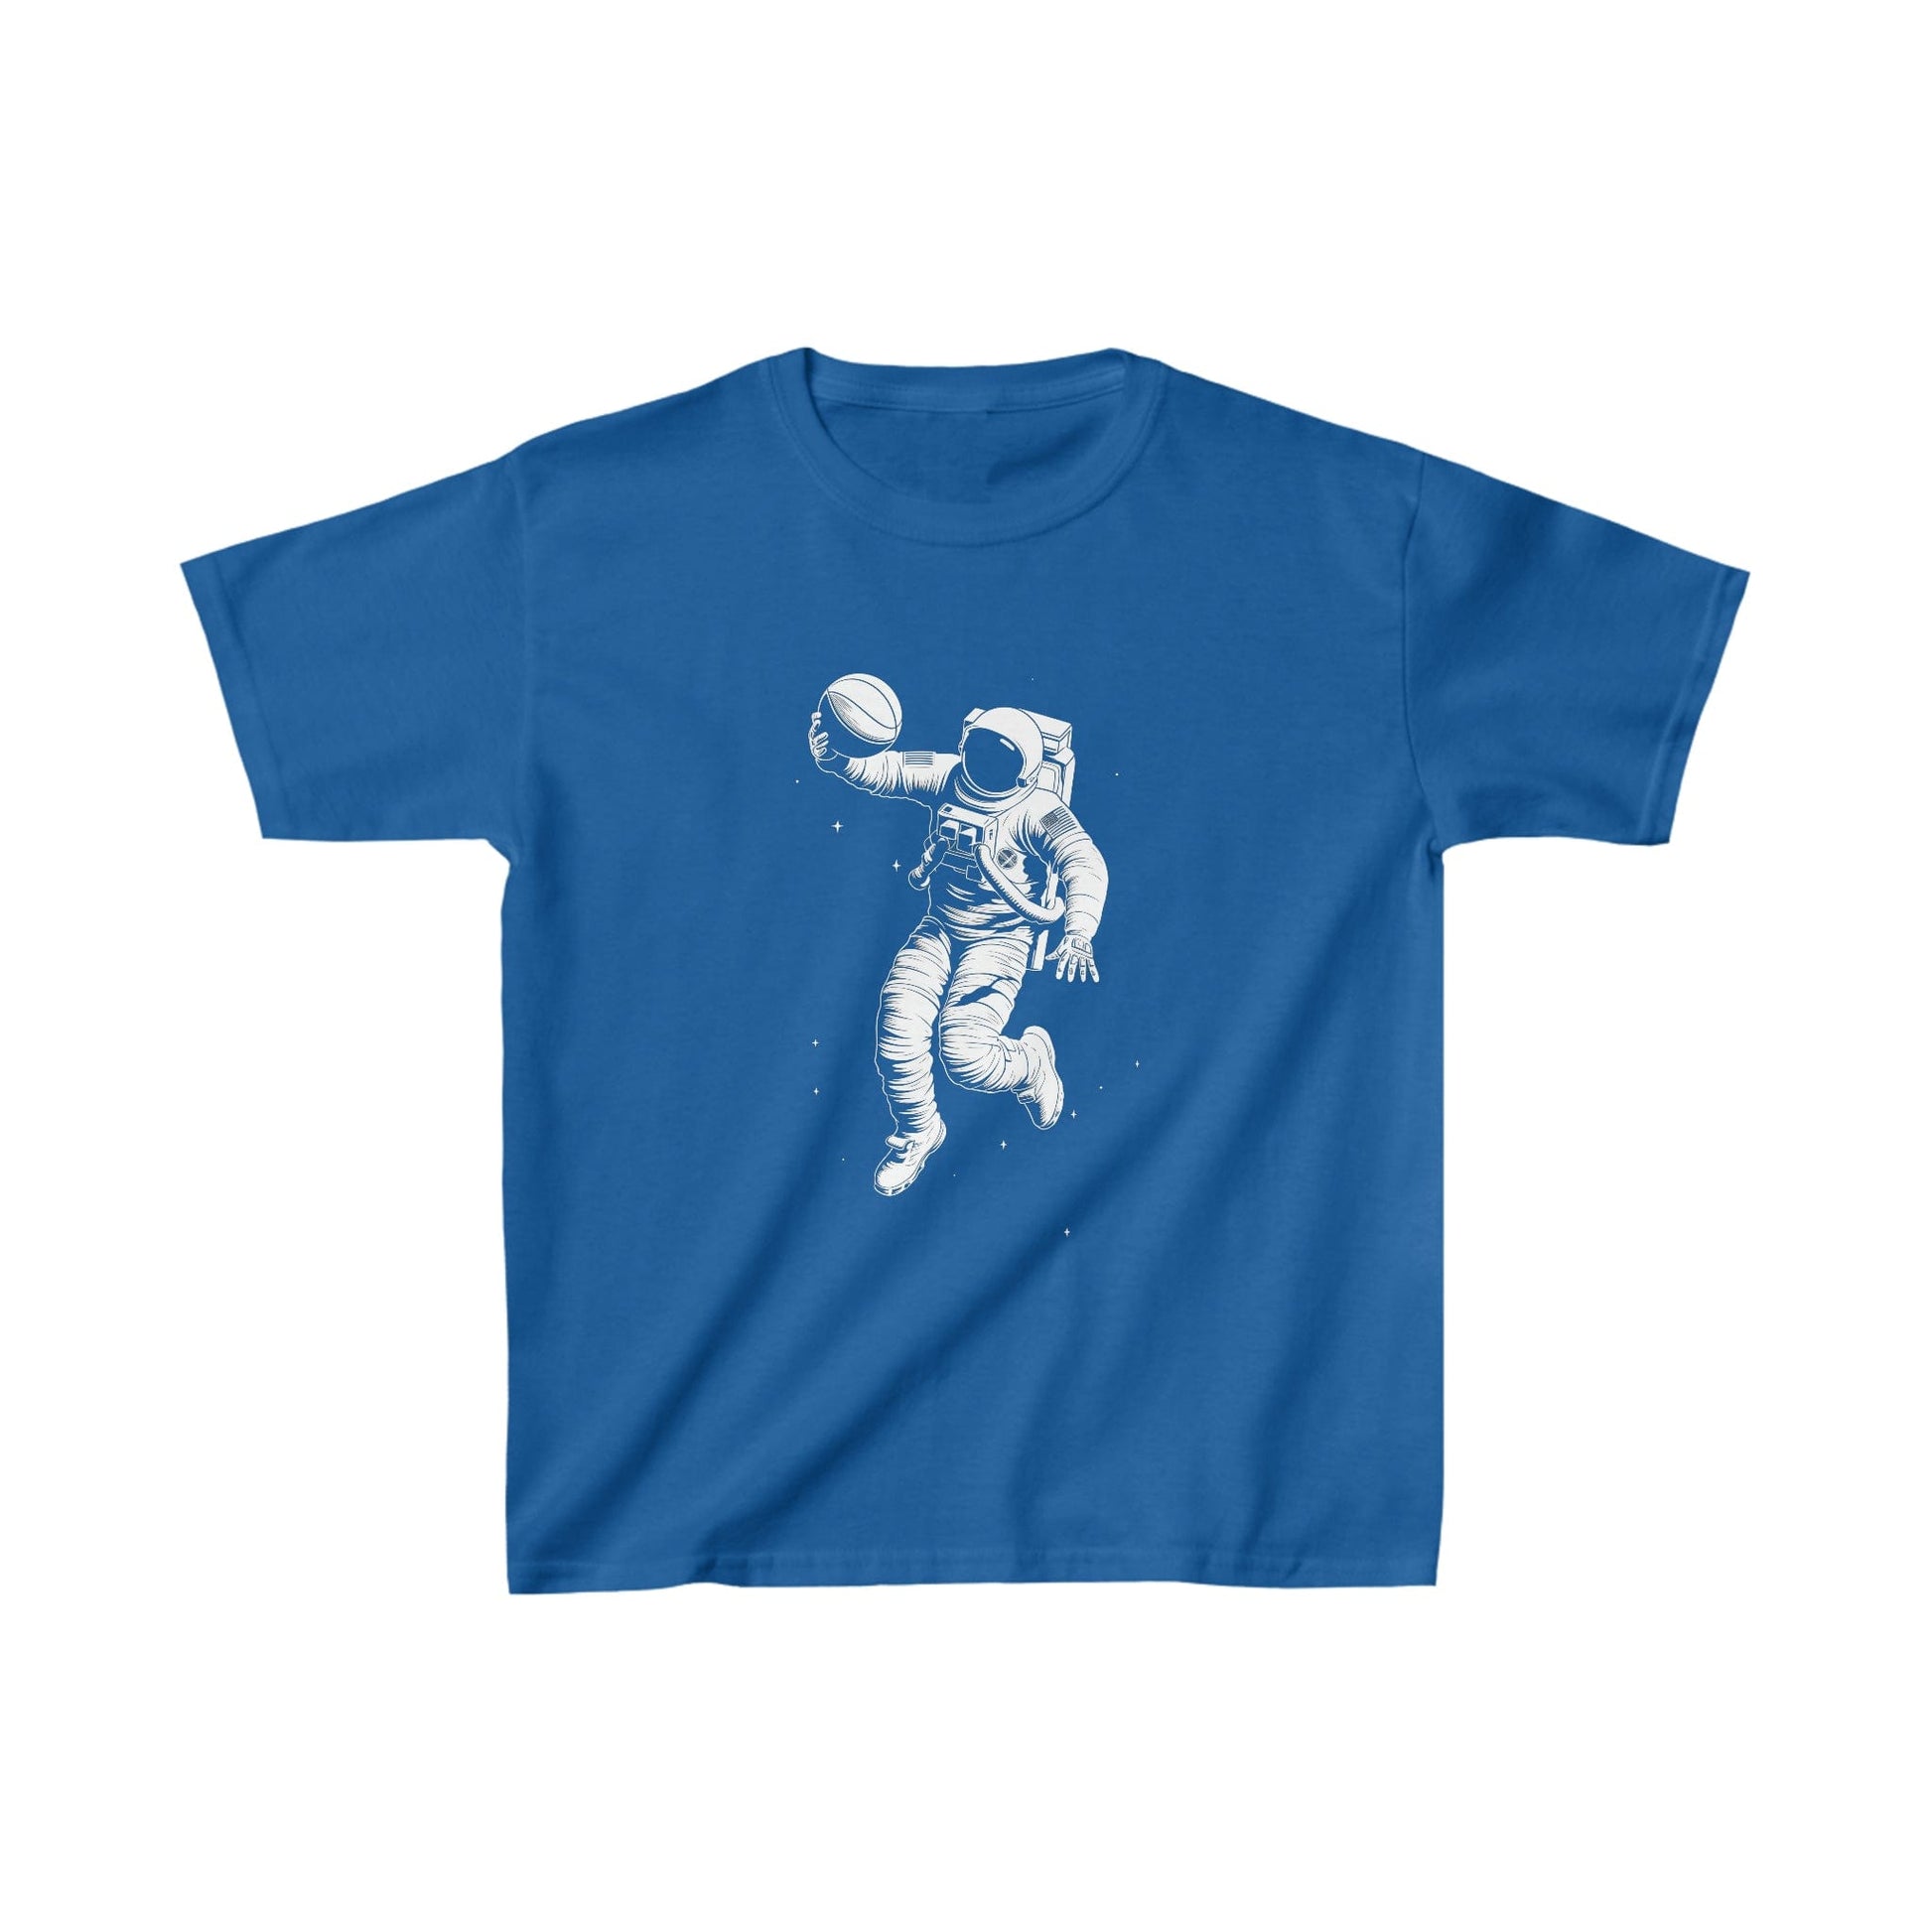 Kids clothes XS / Royal Youth Astronaut Basketball T-Shirt